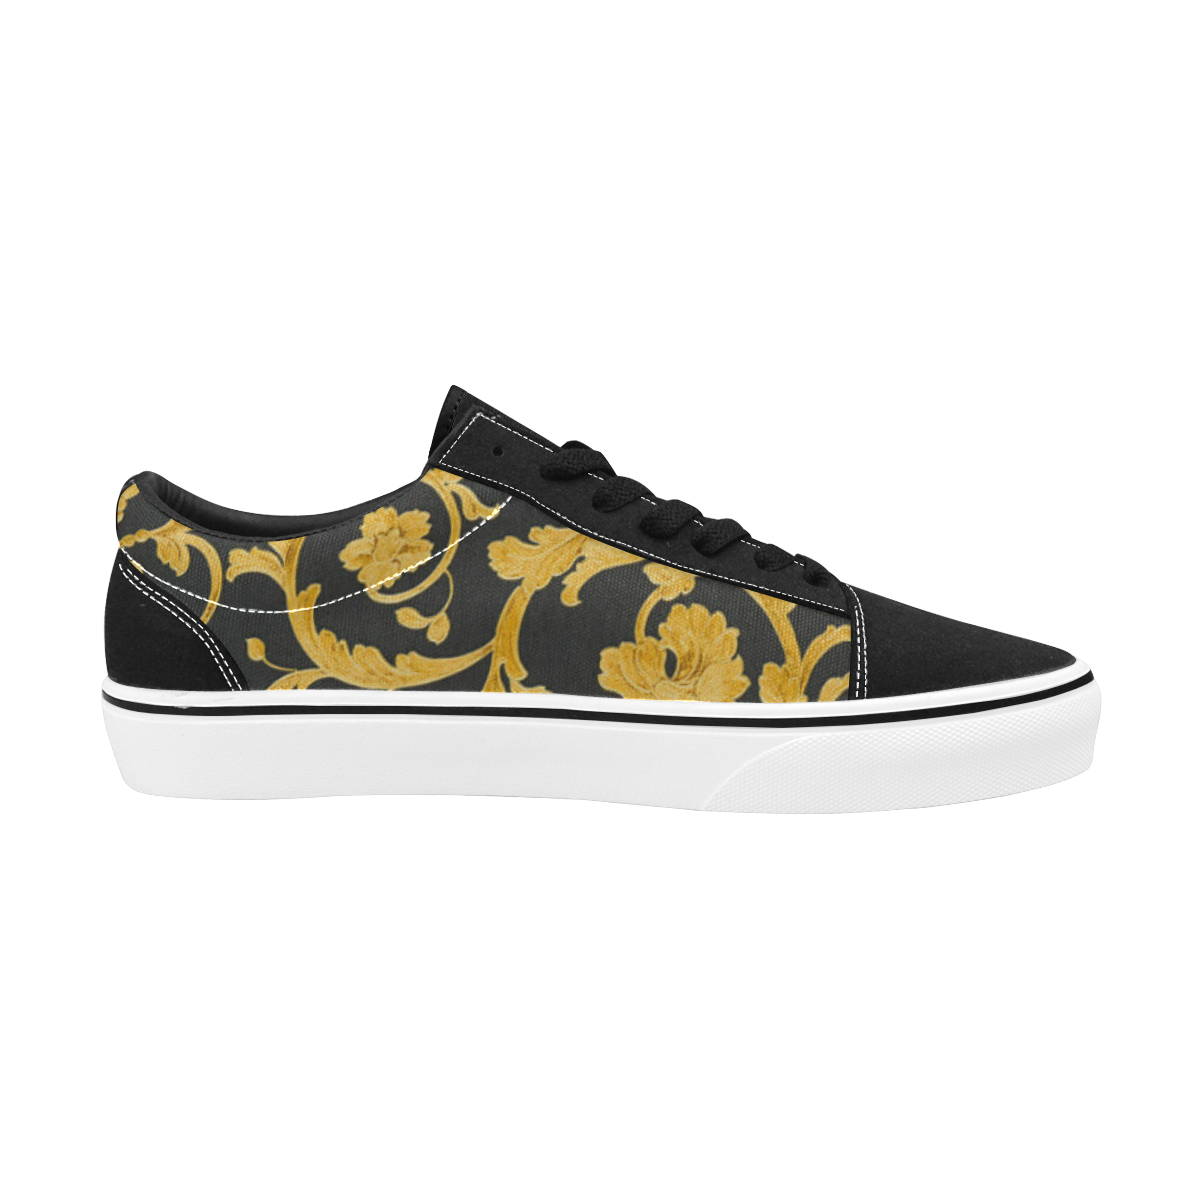 Cashmere Italian Floral print Black And Gold Women's Low Top Skateboarding Shoes/Large (Model E001-2)